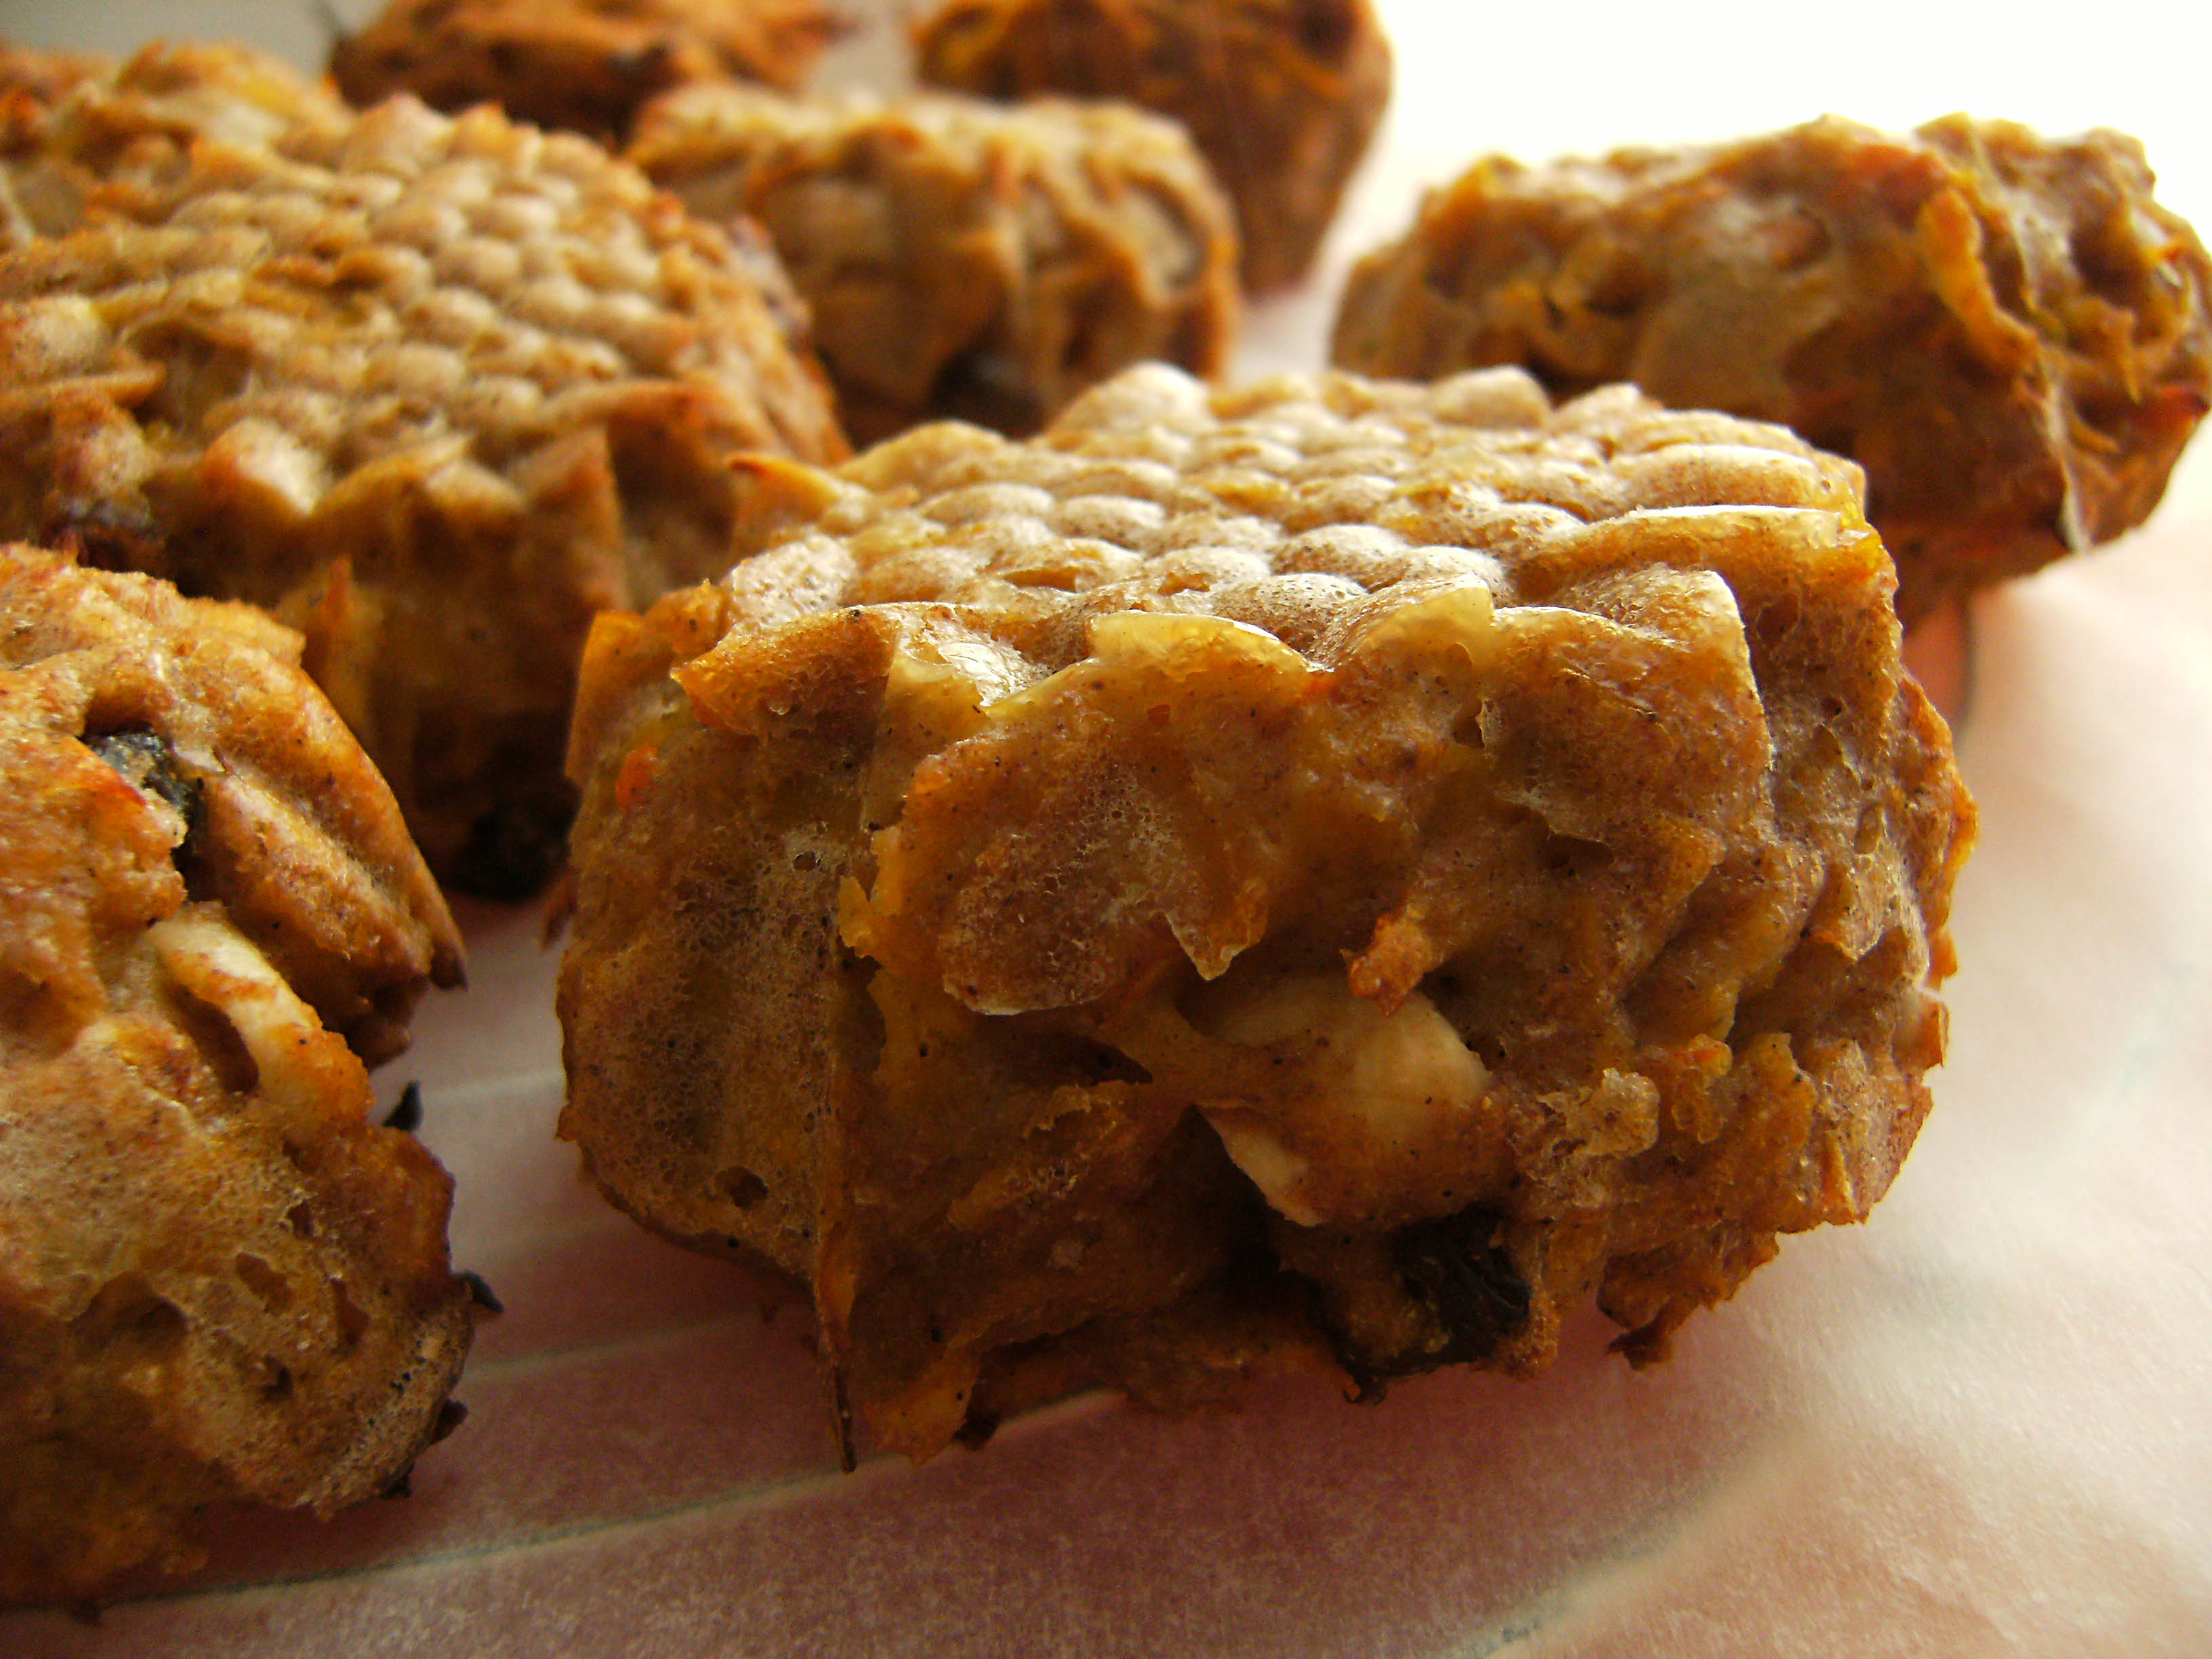 ⁂ Healty DISAPPEARING SWEET POTATO MUFFINS